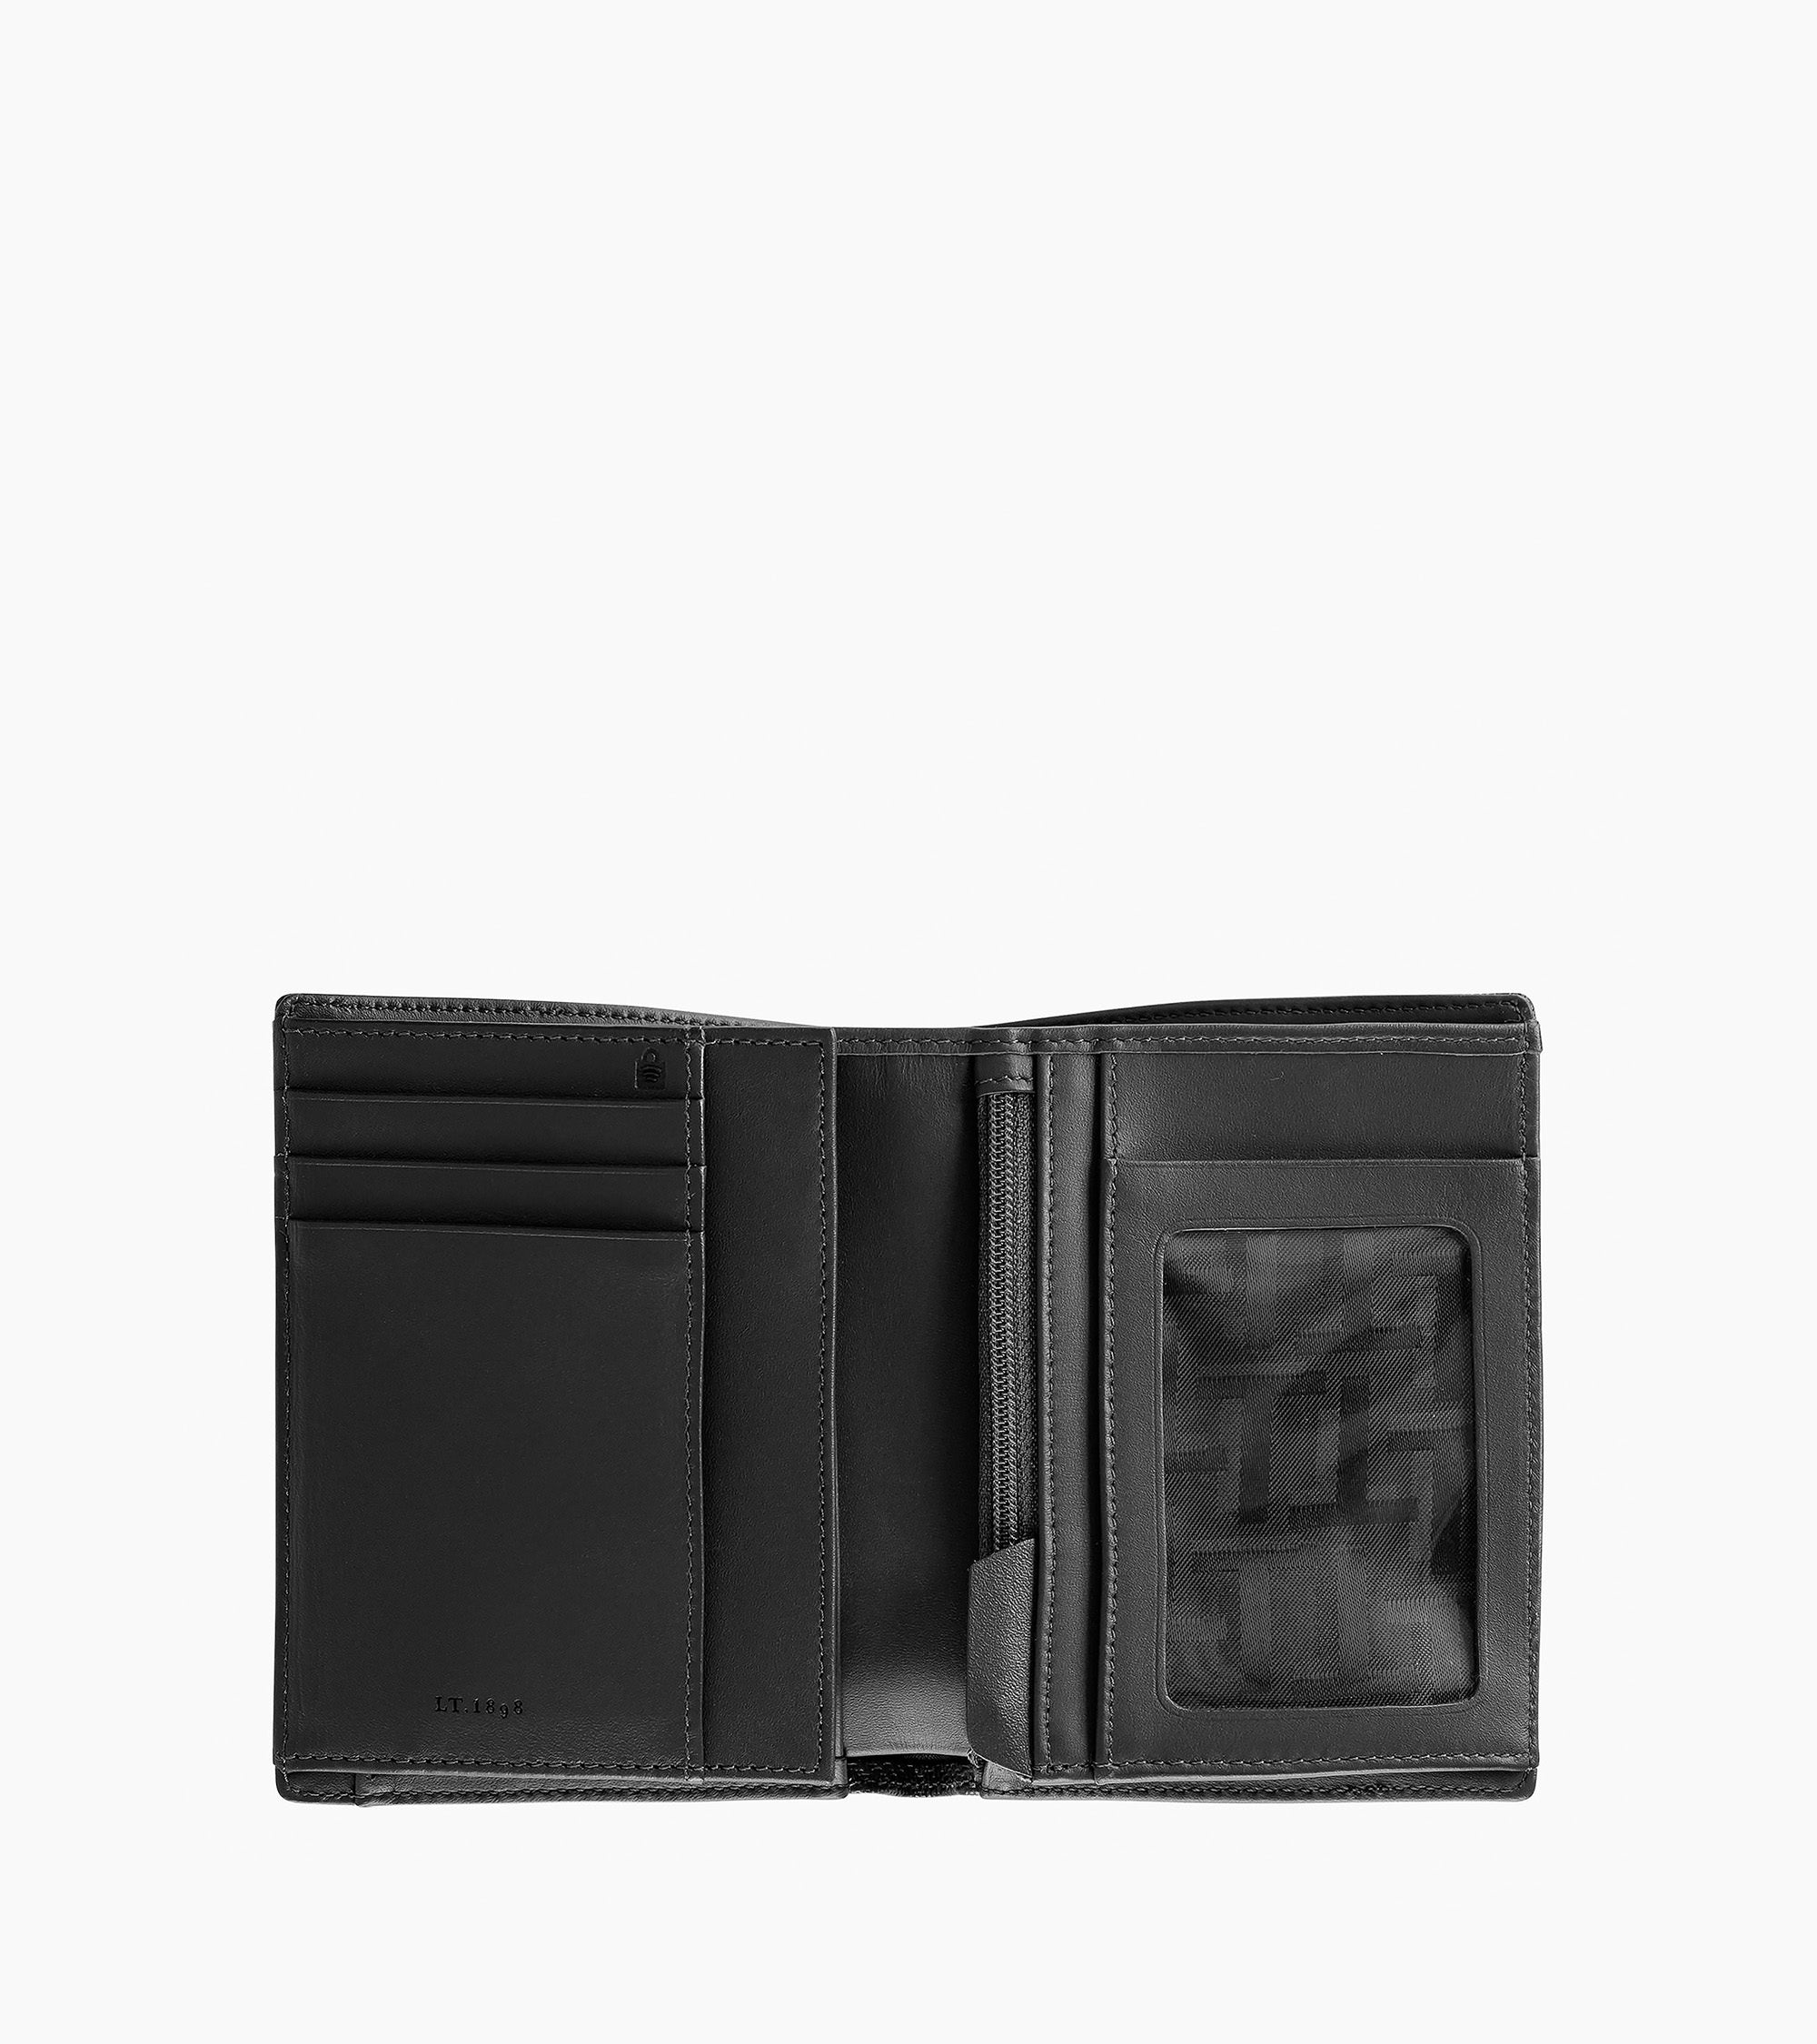 Zipped pocket and 2 shutters Emile T signature leather wallet